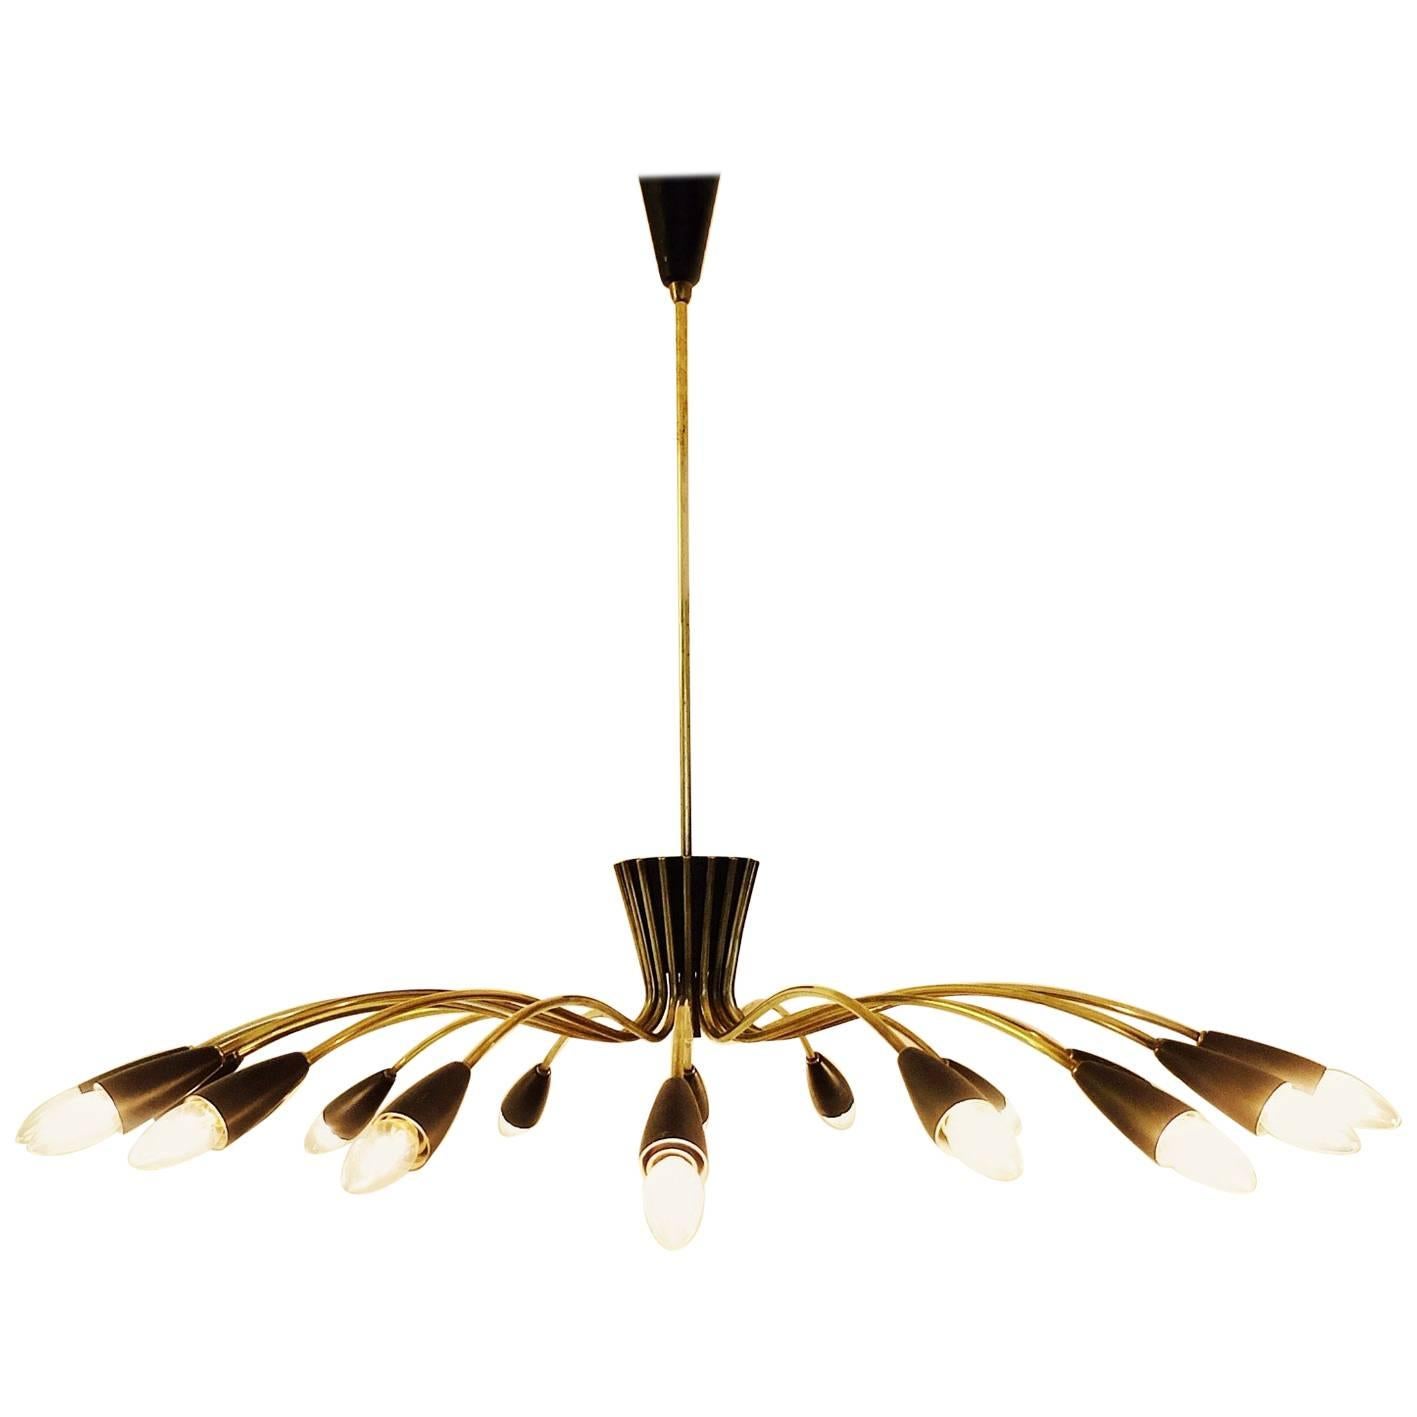 Elegant 1960s Italian Chandelier in Brass and Black Lacquer